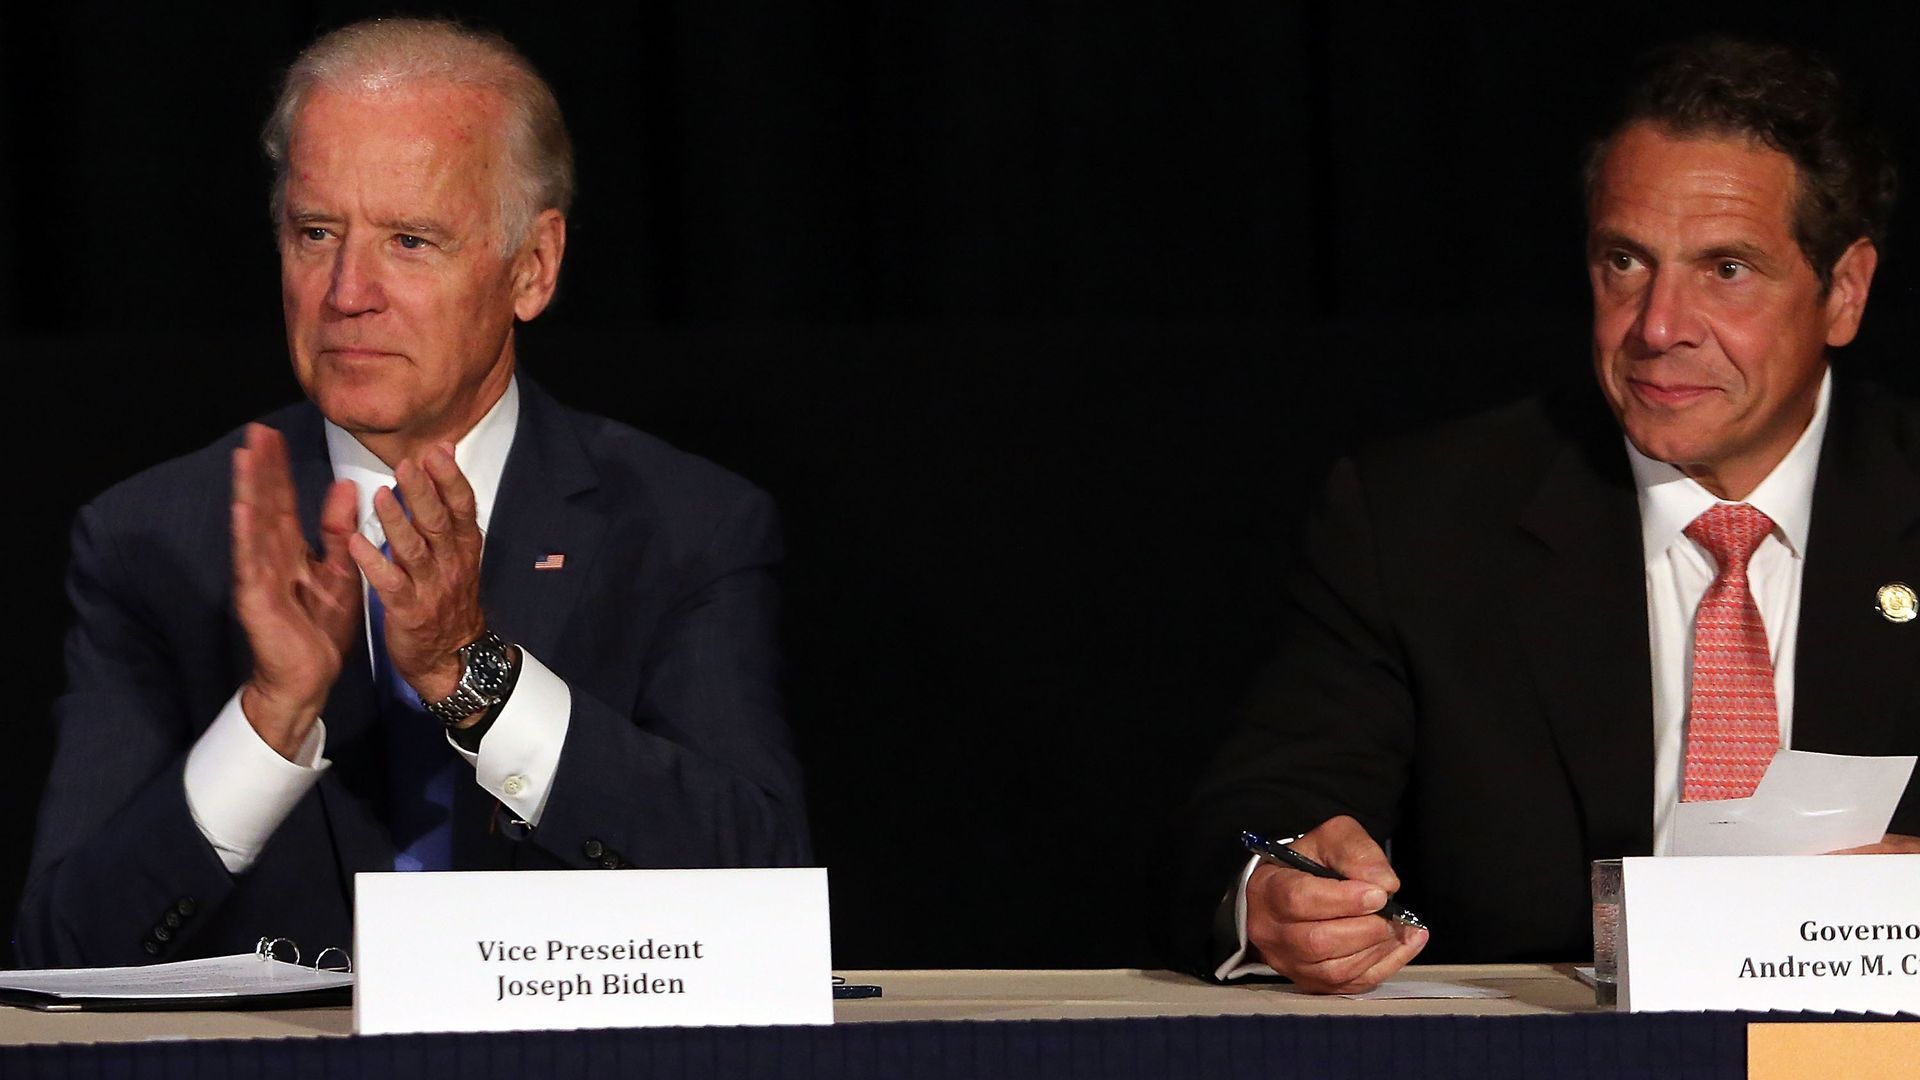 Biden and Cuomo at a table.